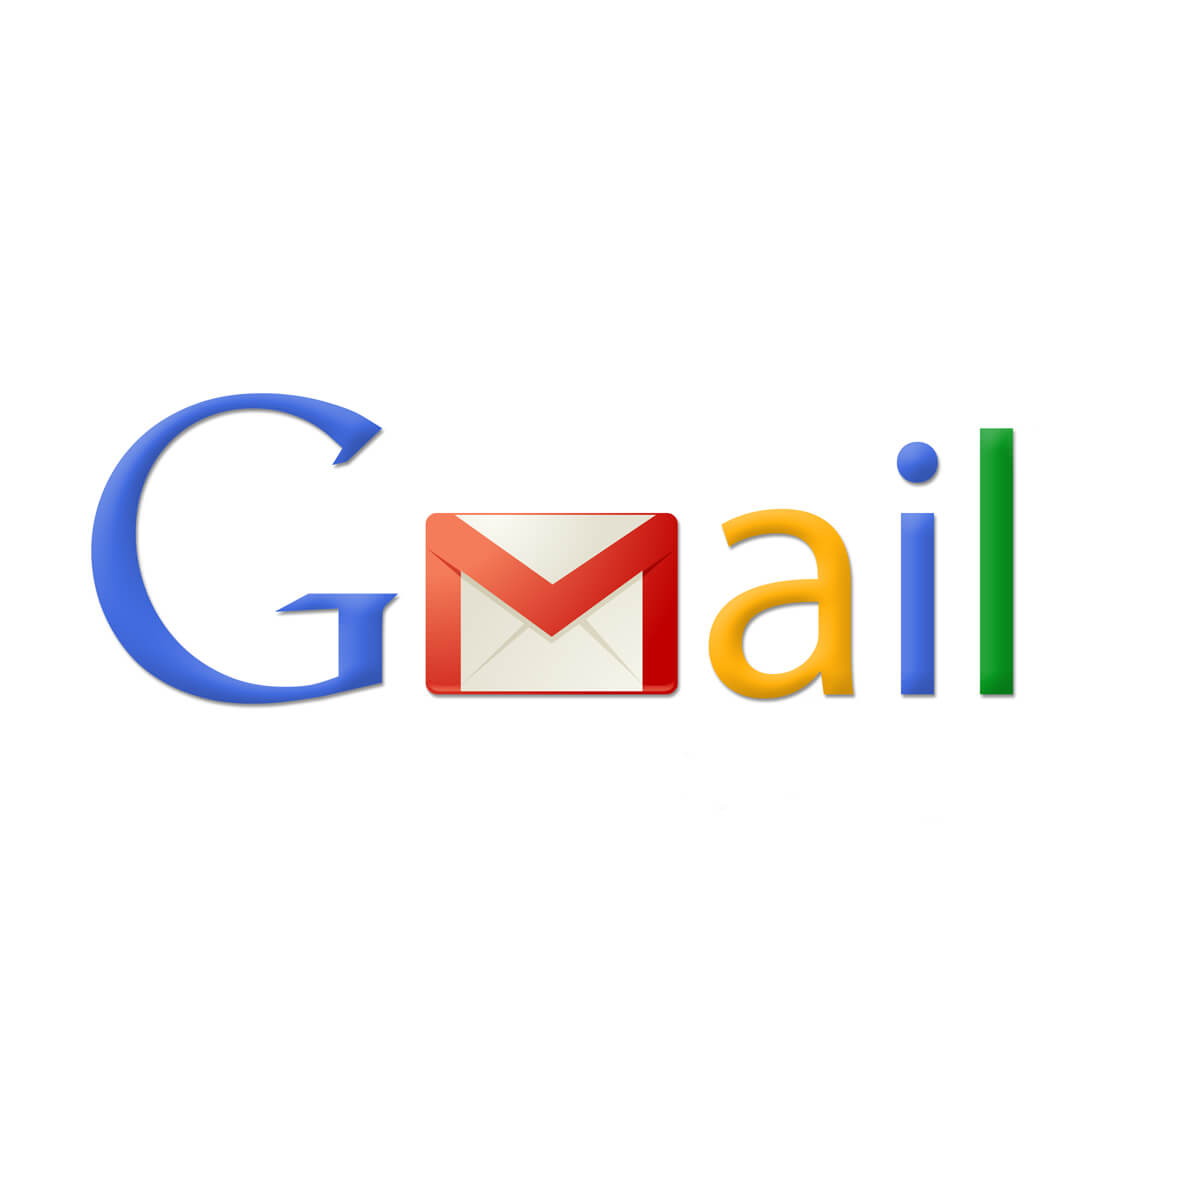 There was a problem connecting to Gmail